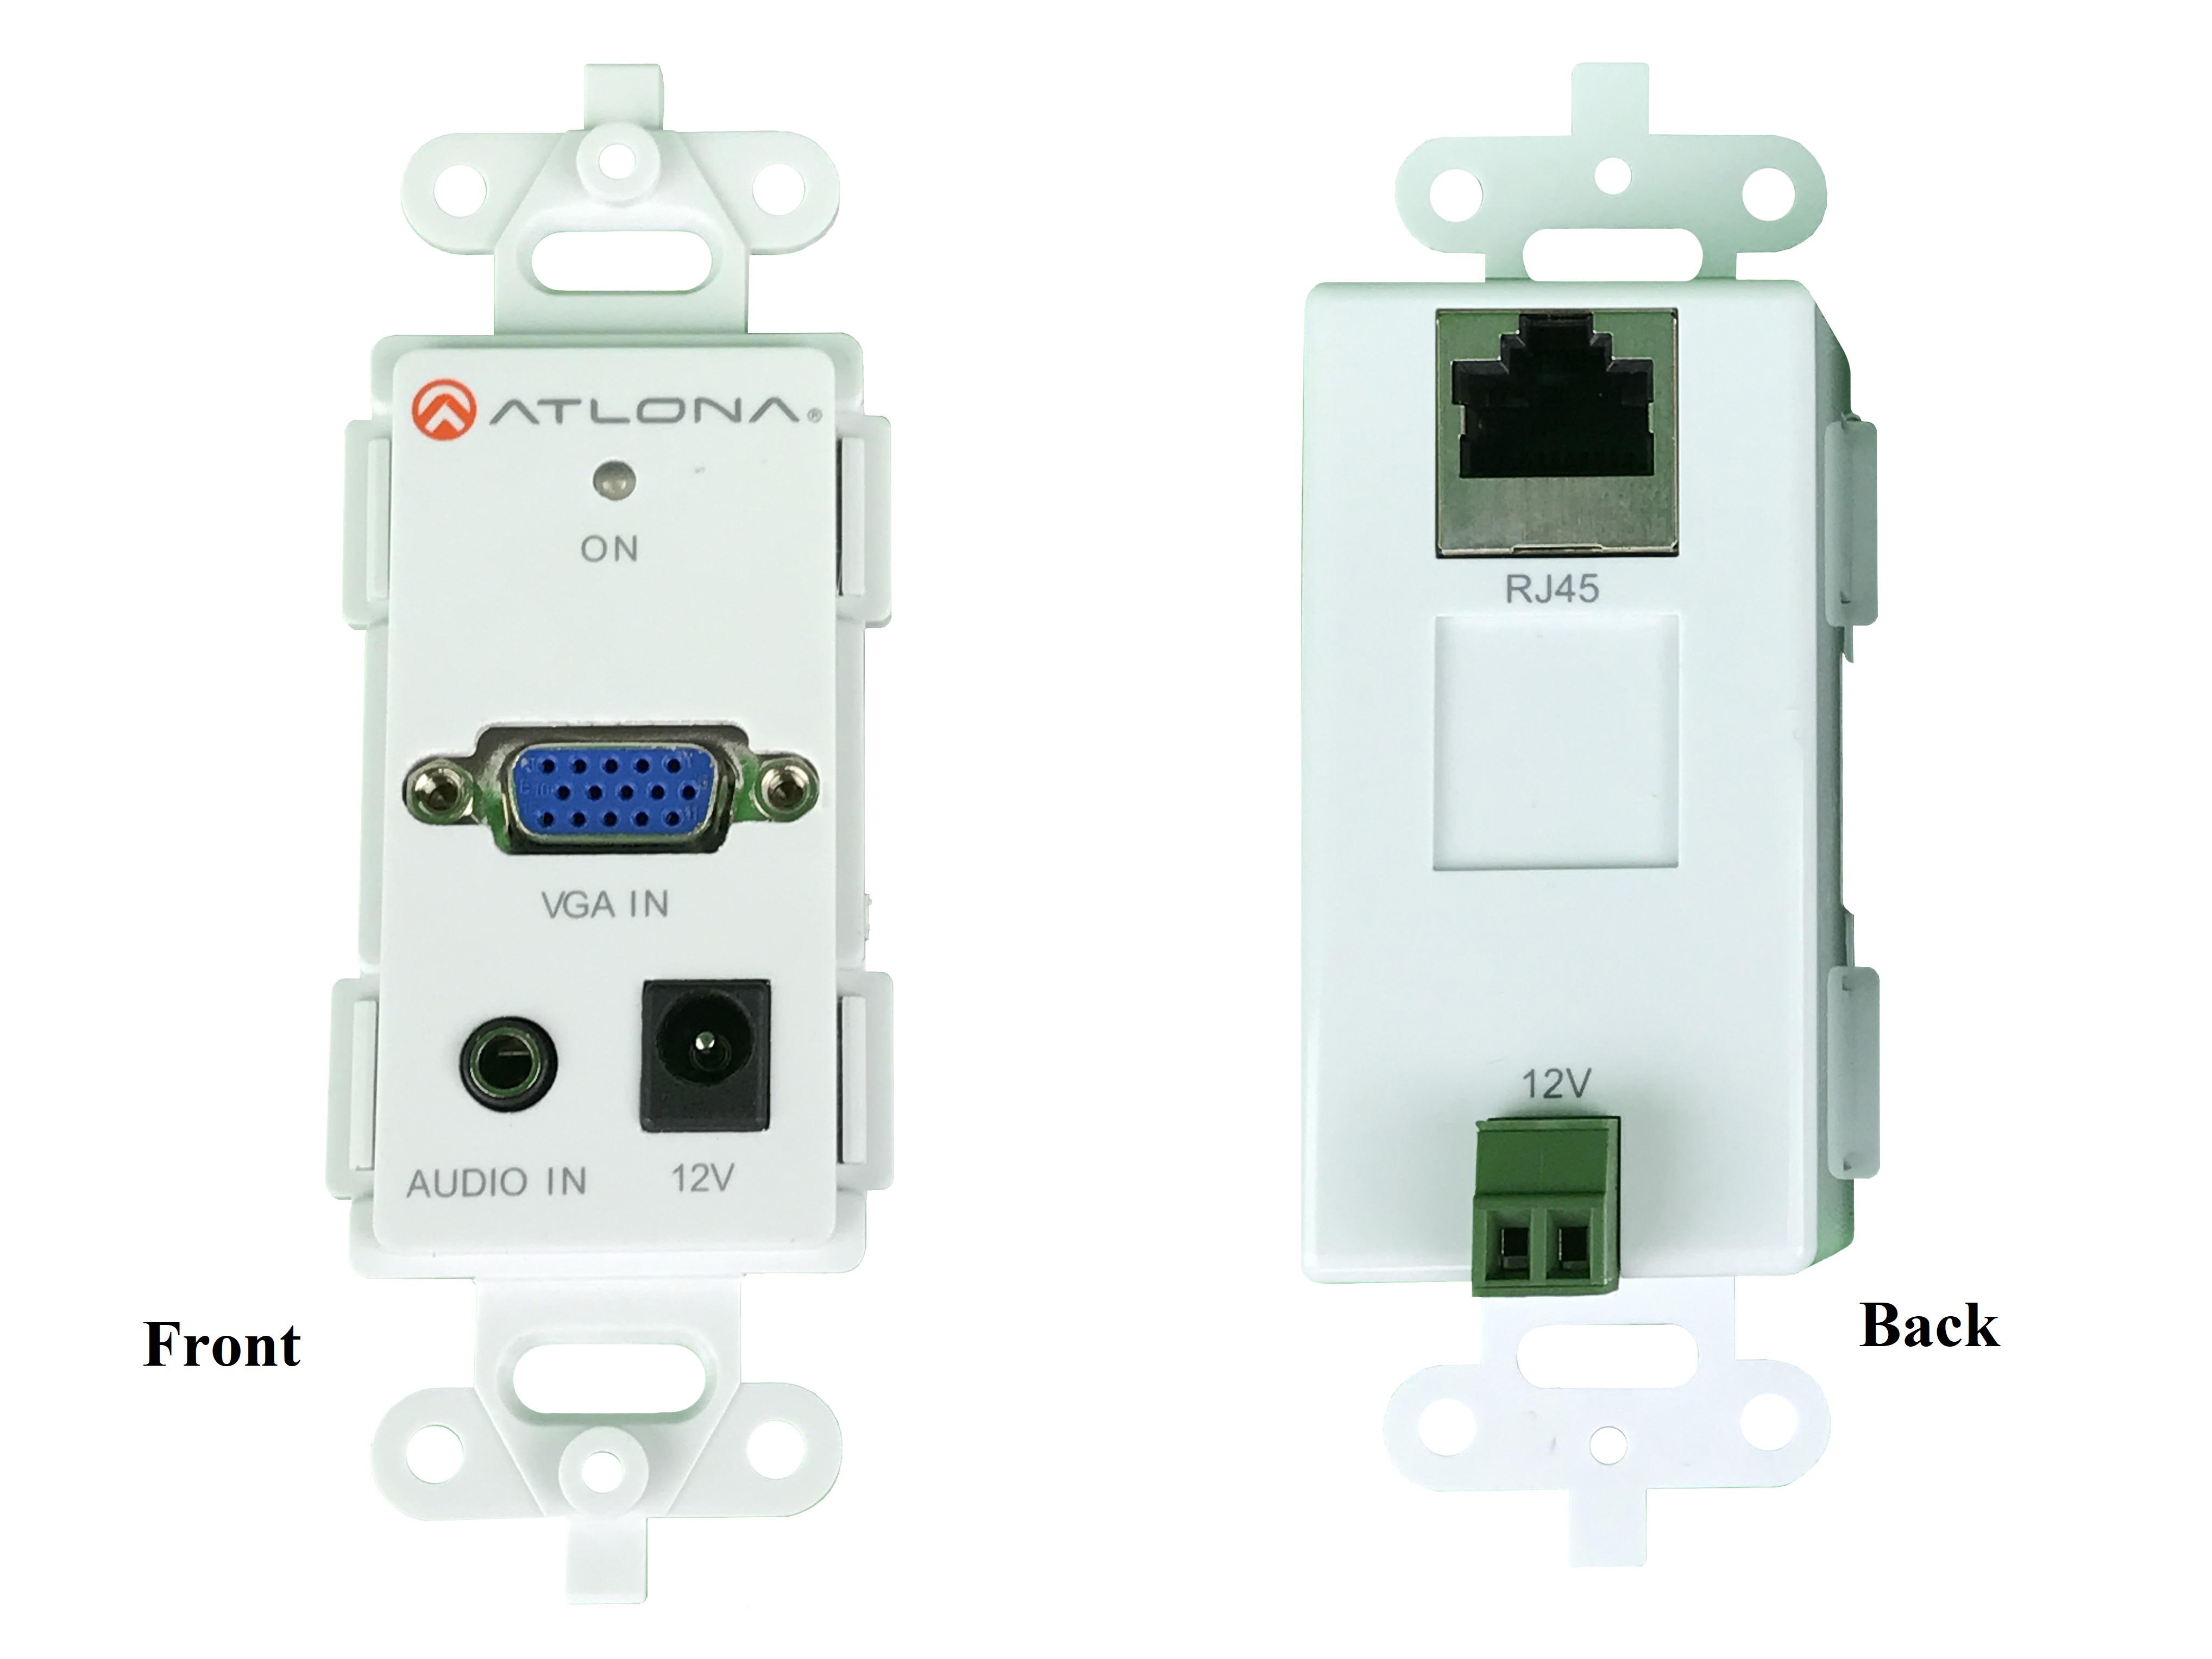 AT-VGAPW-SR VGA Video and Audio Wall Plate UTP/CAT5 Extender (Transmitter/Receiver) Set by Atlona